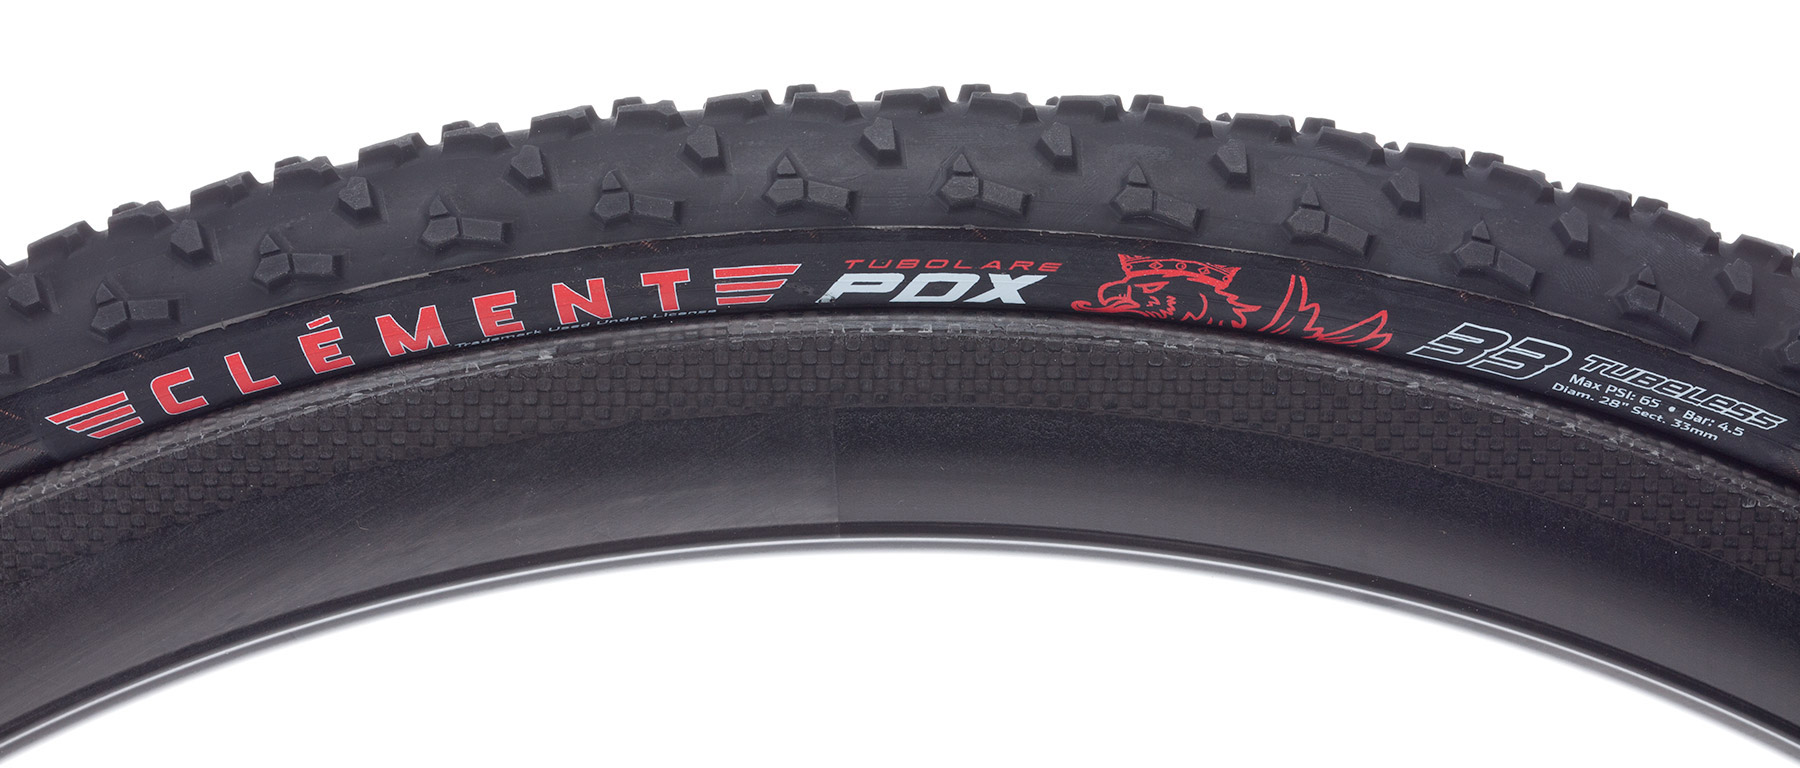 Donnelly PDX Tubular Cyclocross Tire